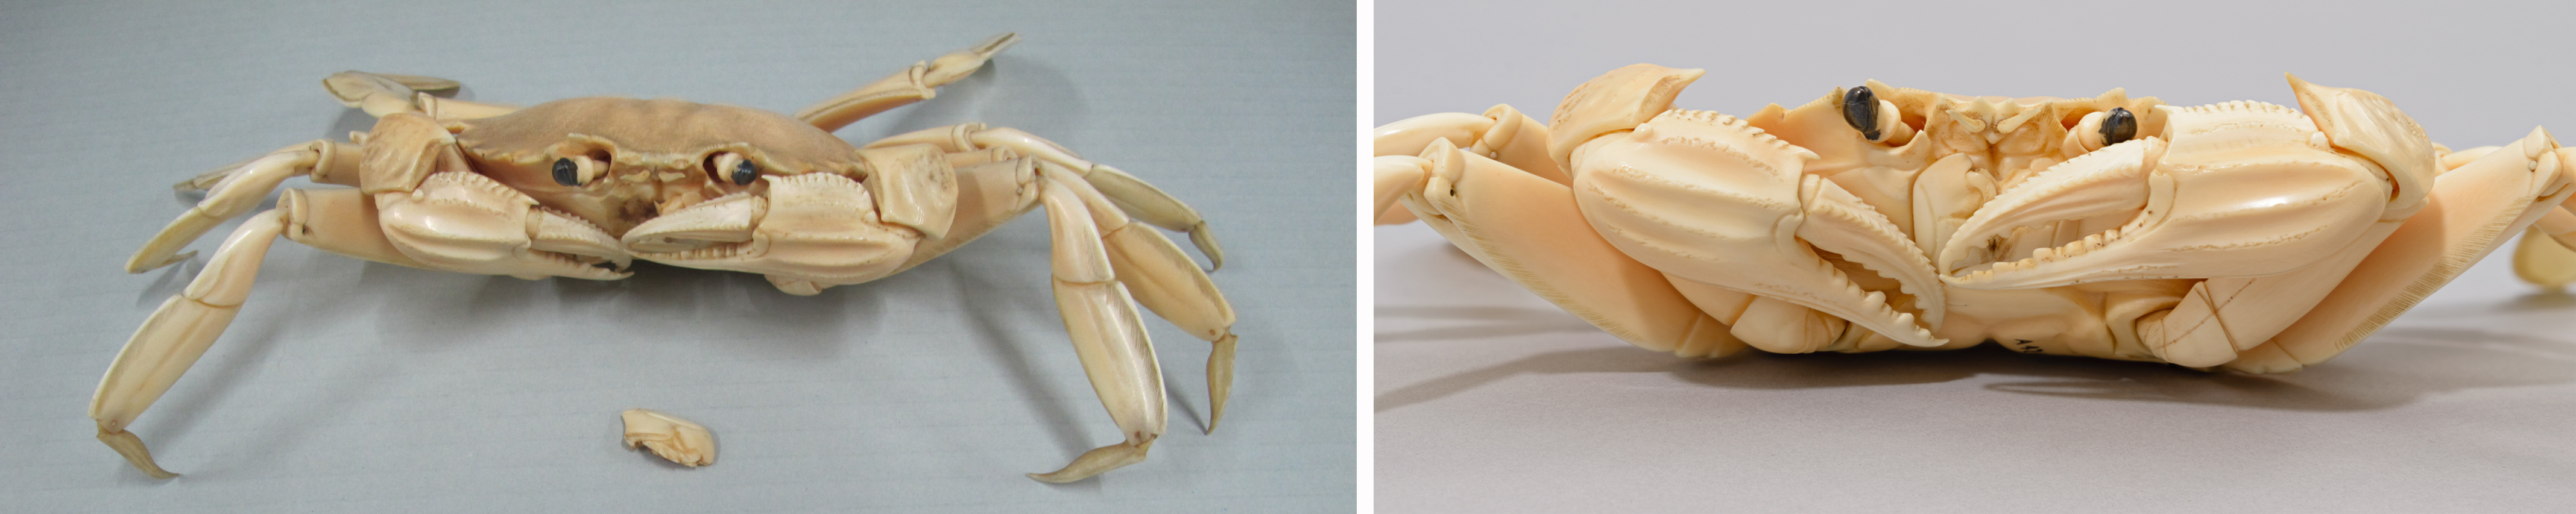 Left: angled front view of ivory crab: the ivory is covered with a layer of dust and dirt and a part of the mouth is detached. Right: front view of the main body of the crab after cleaning and repairs: the ivory has regained its natural warm colour and lustre.